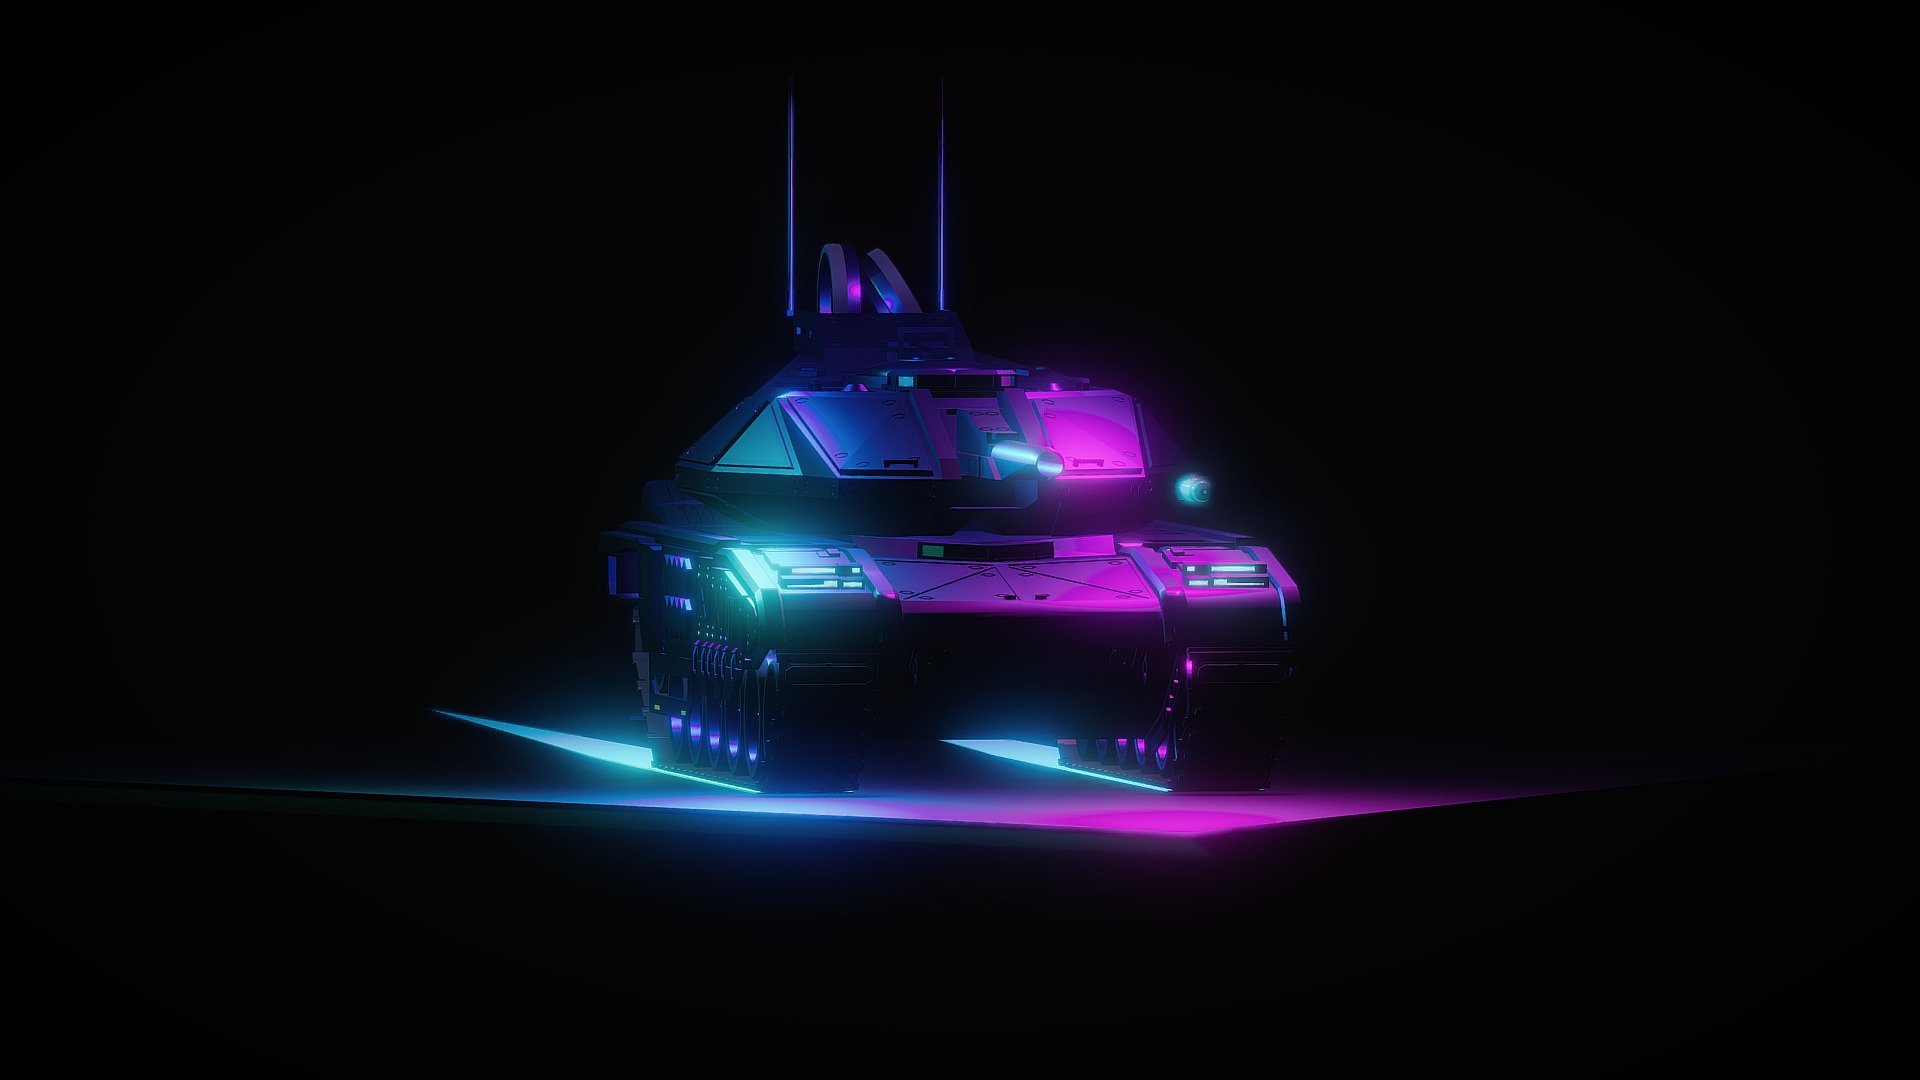 NEON TANK , 80s VIBE , SynthWave . Music by EXHALE - NEON TANK - 3D model by EXHALE (@design.ruben) 3d model